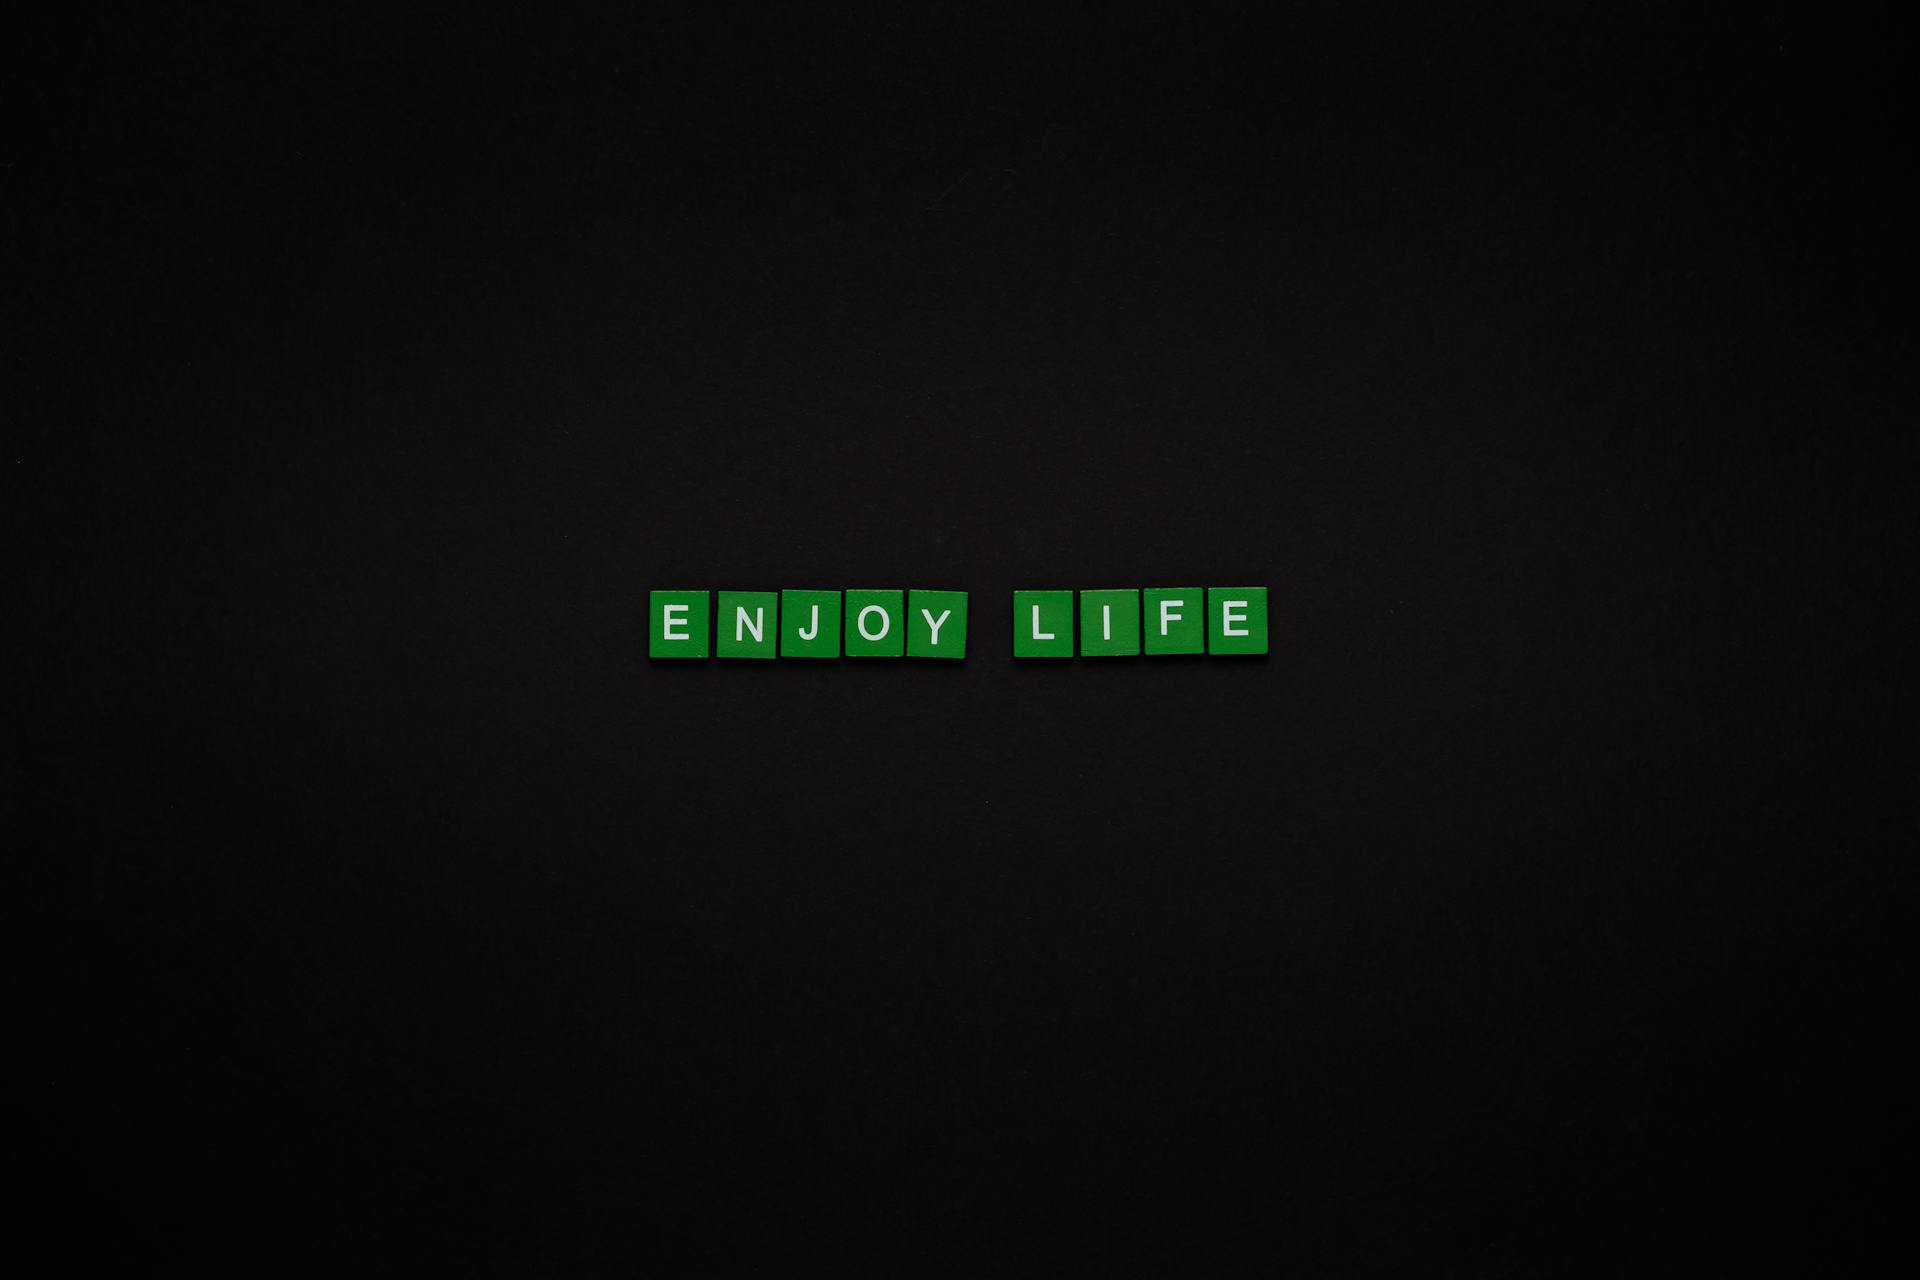 Enjoy Life Text On Green Tiles With Black Background